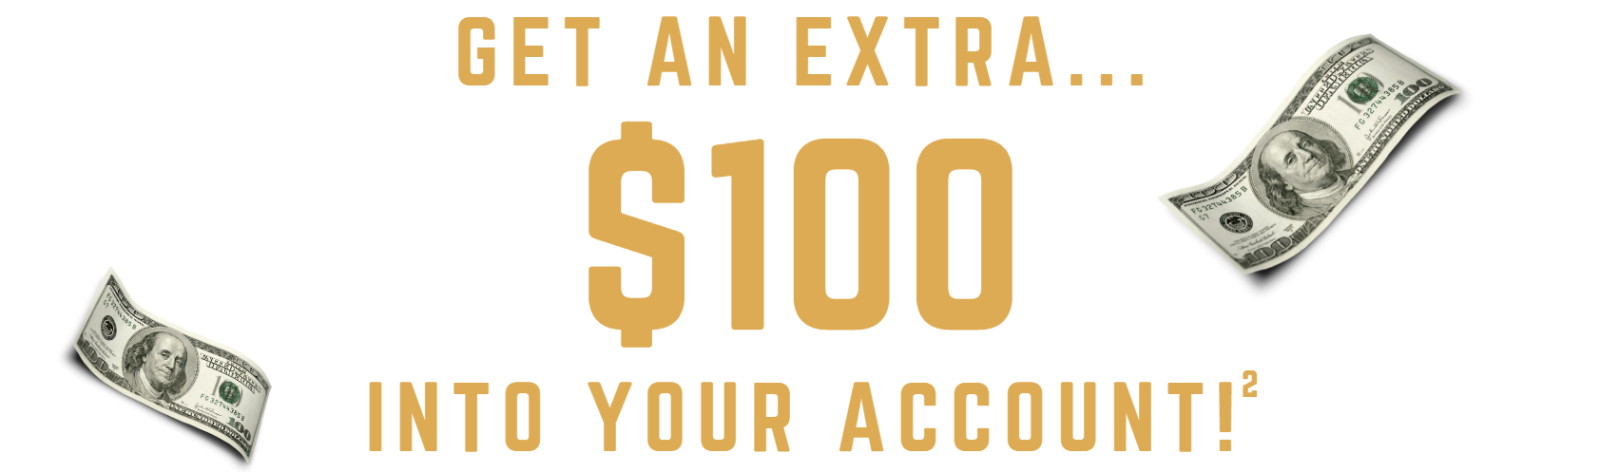 Get an extra $100 in your account!^2